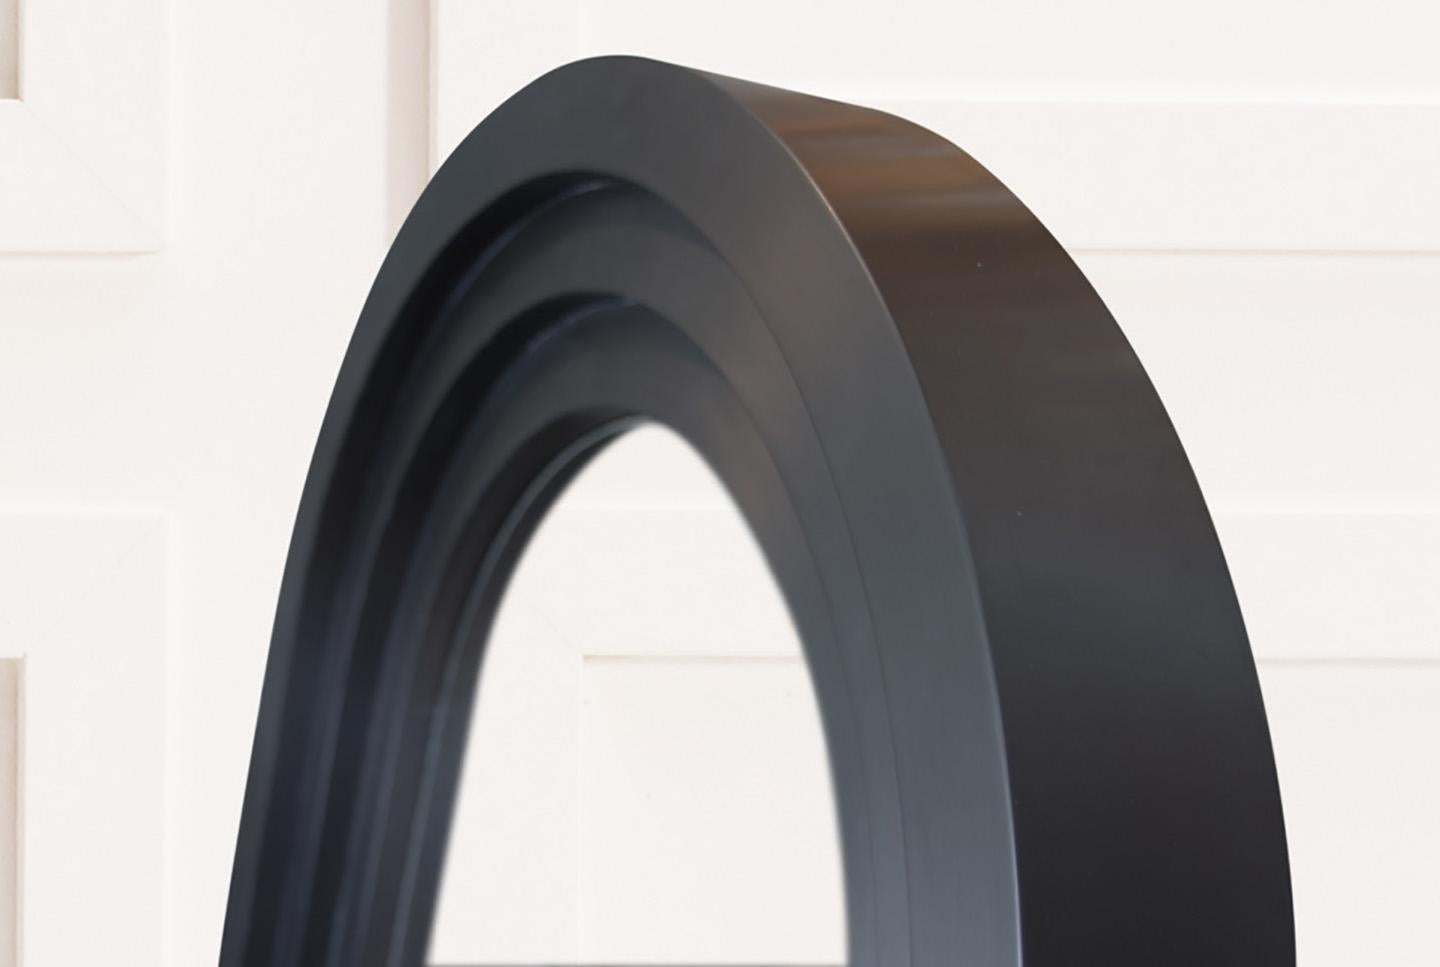 A multi-tiered arch, finished in rich satin black, frames a large mirror. Available in custom sizes, as well as metal finishes. Please contact us further to discuss any custom options.

Please note lead times for customized orders may vary. Rush